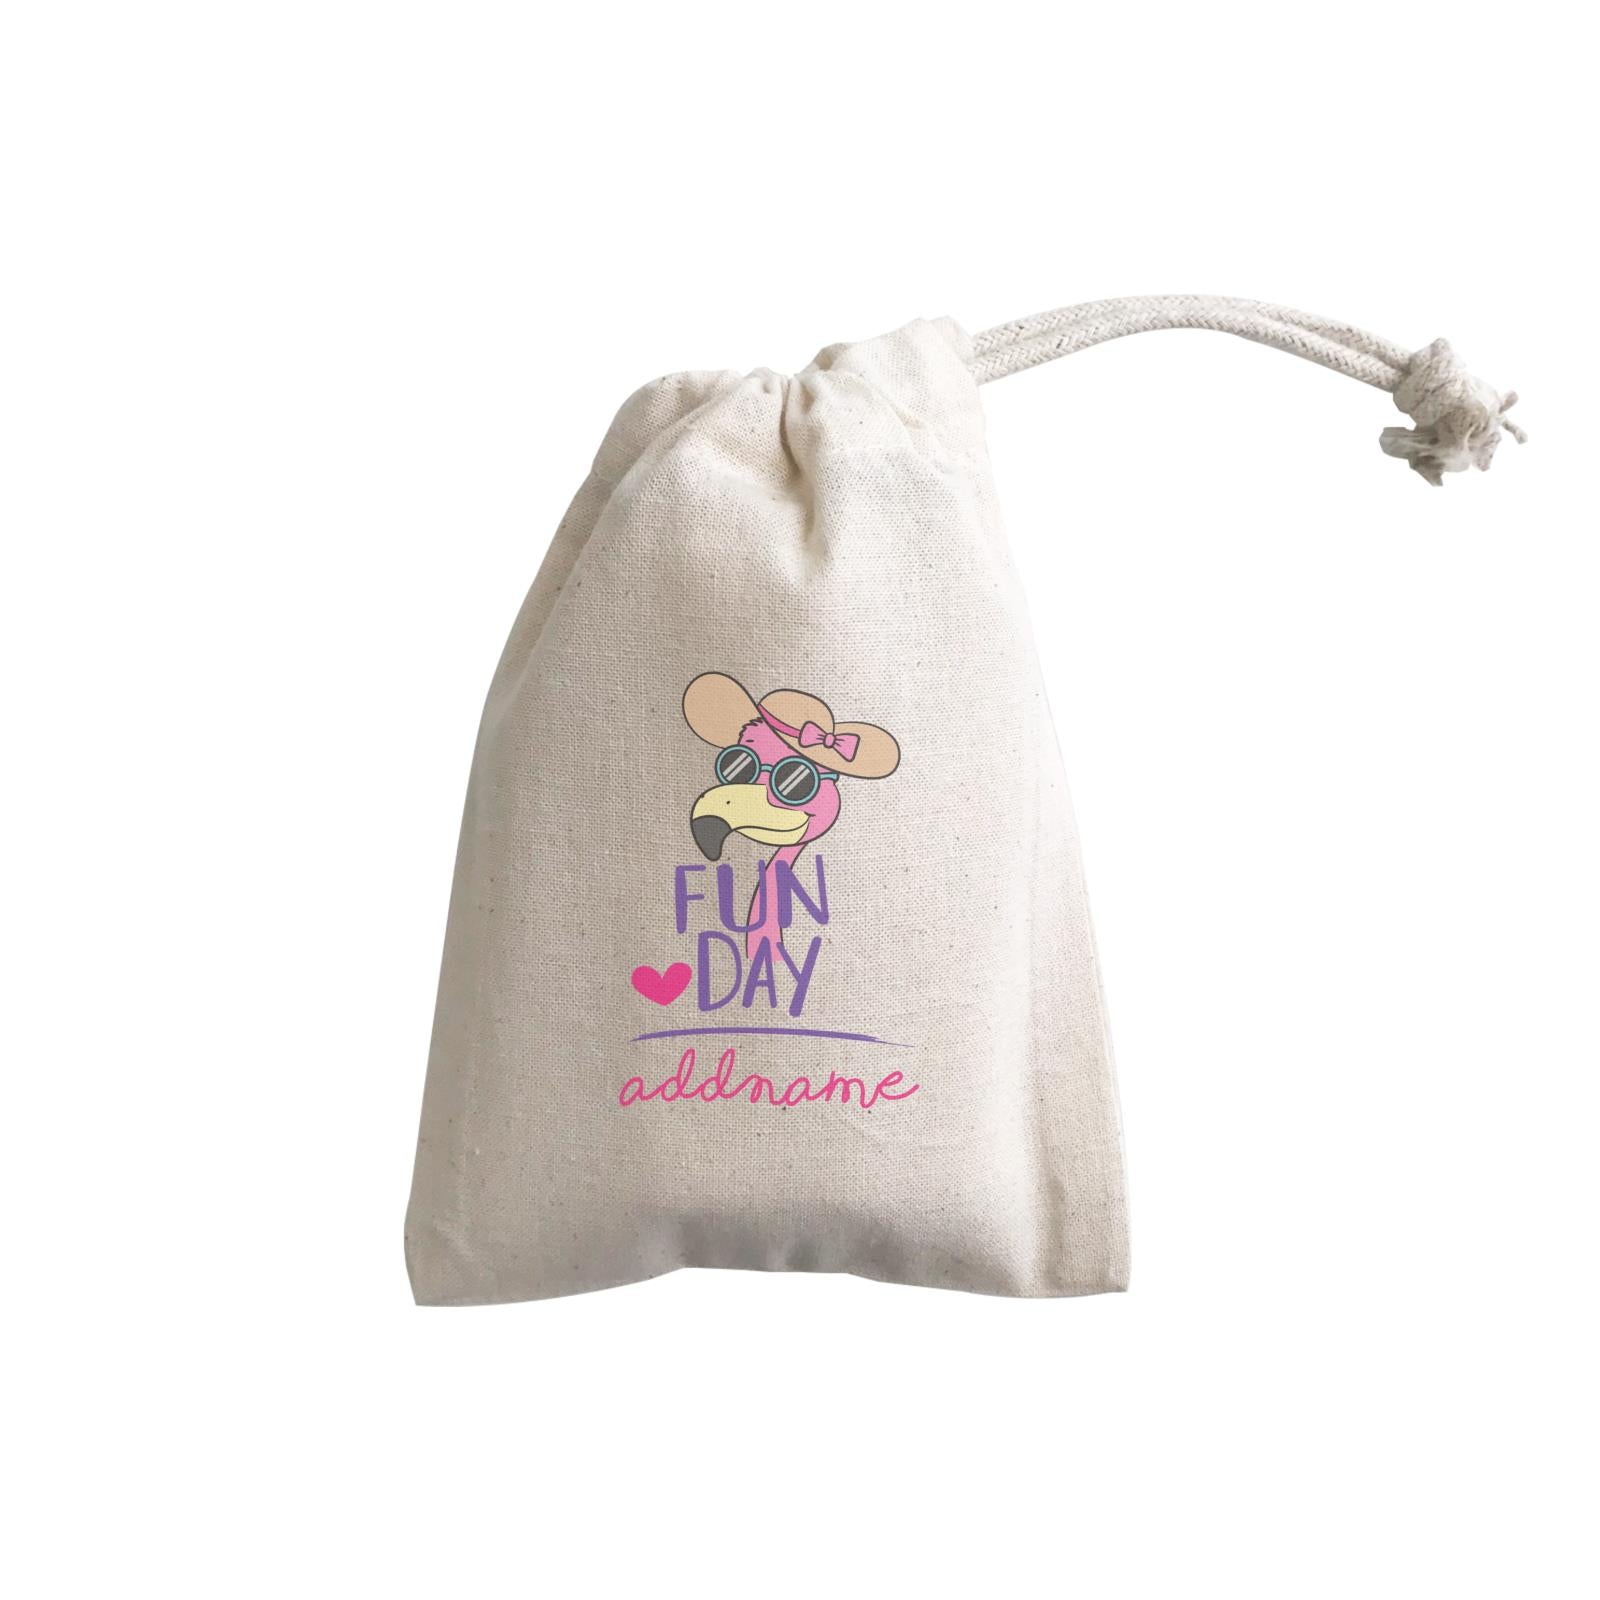 Cool Cute Animals Flamingo Fun Day Addname GP Gift Pouch